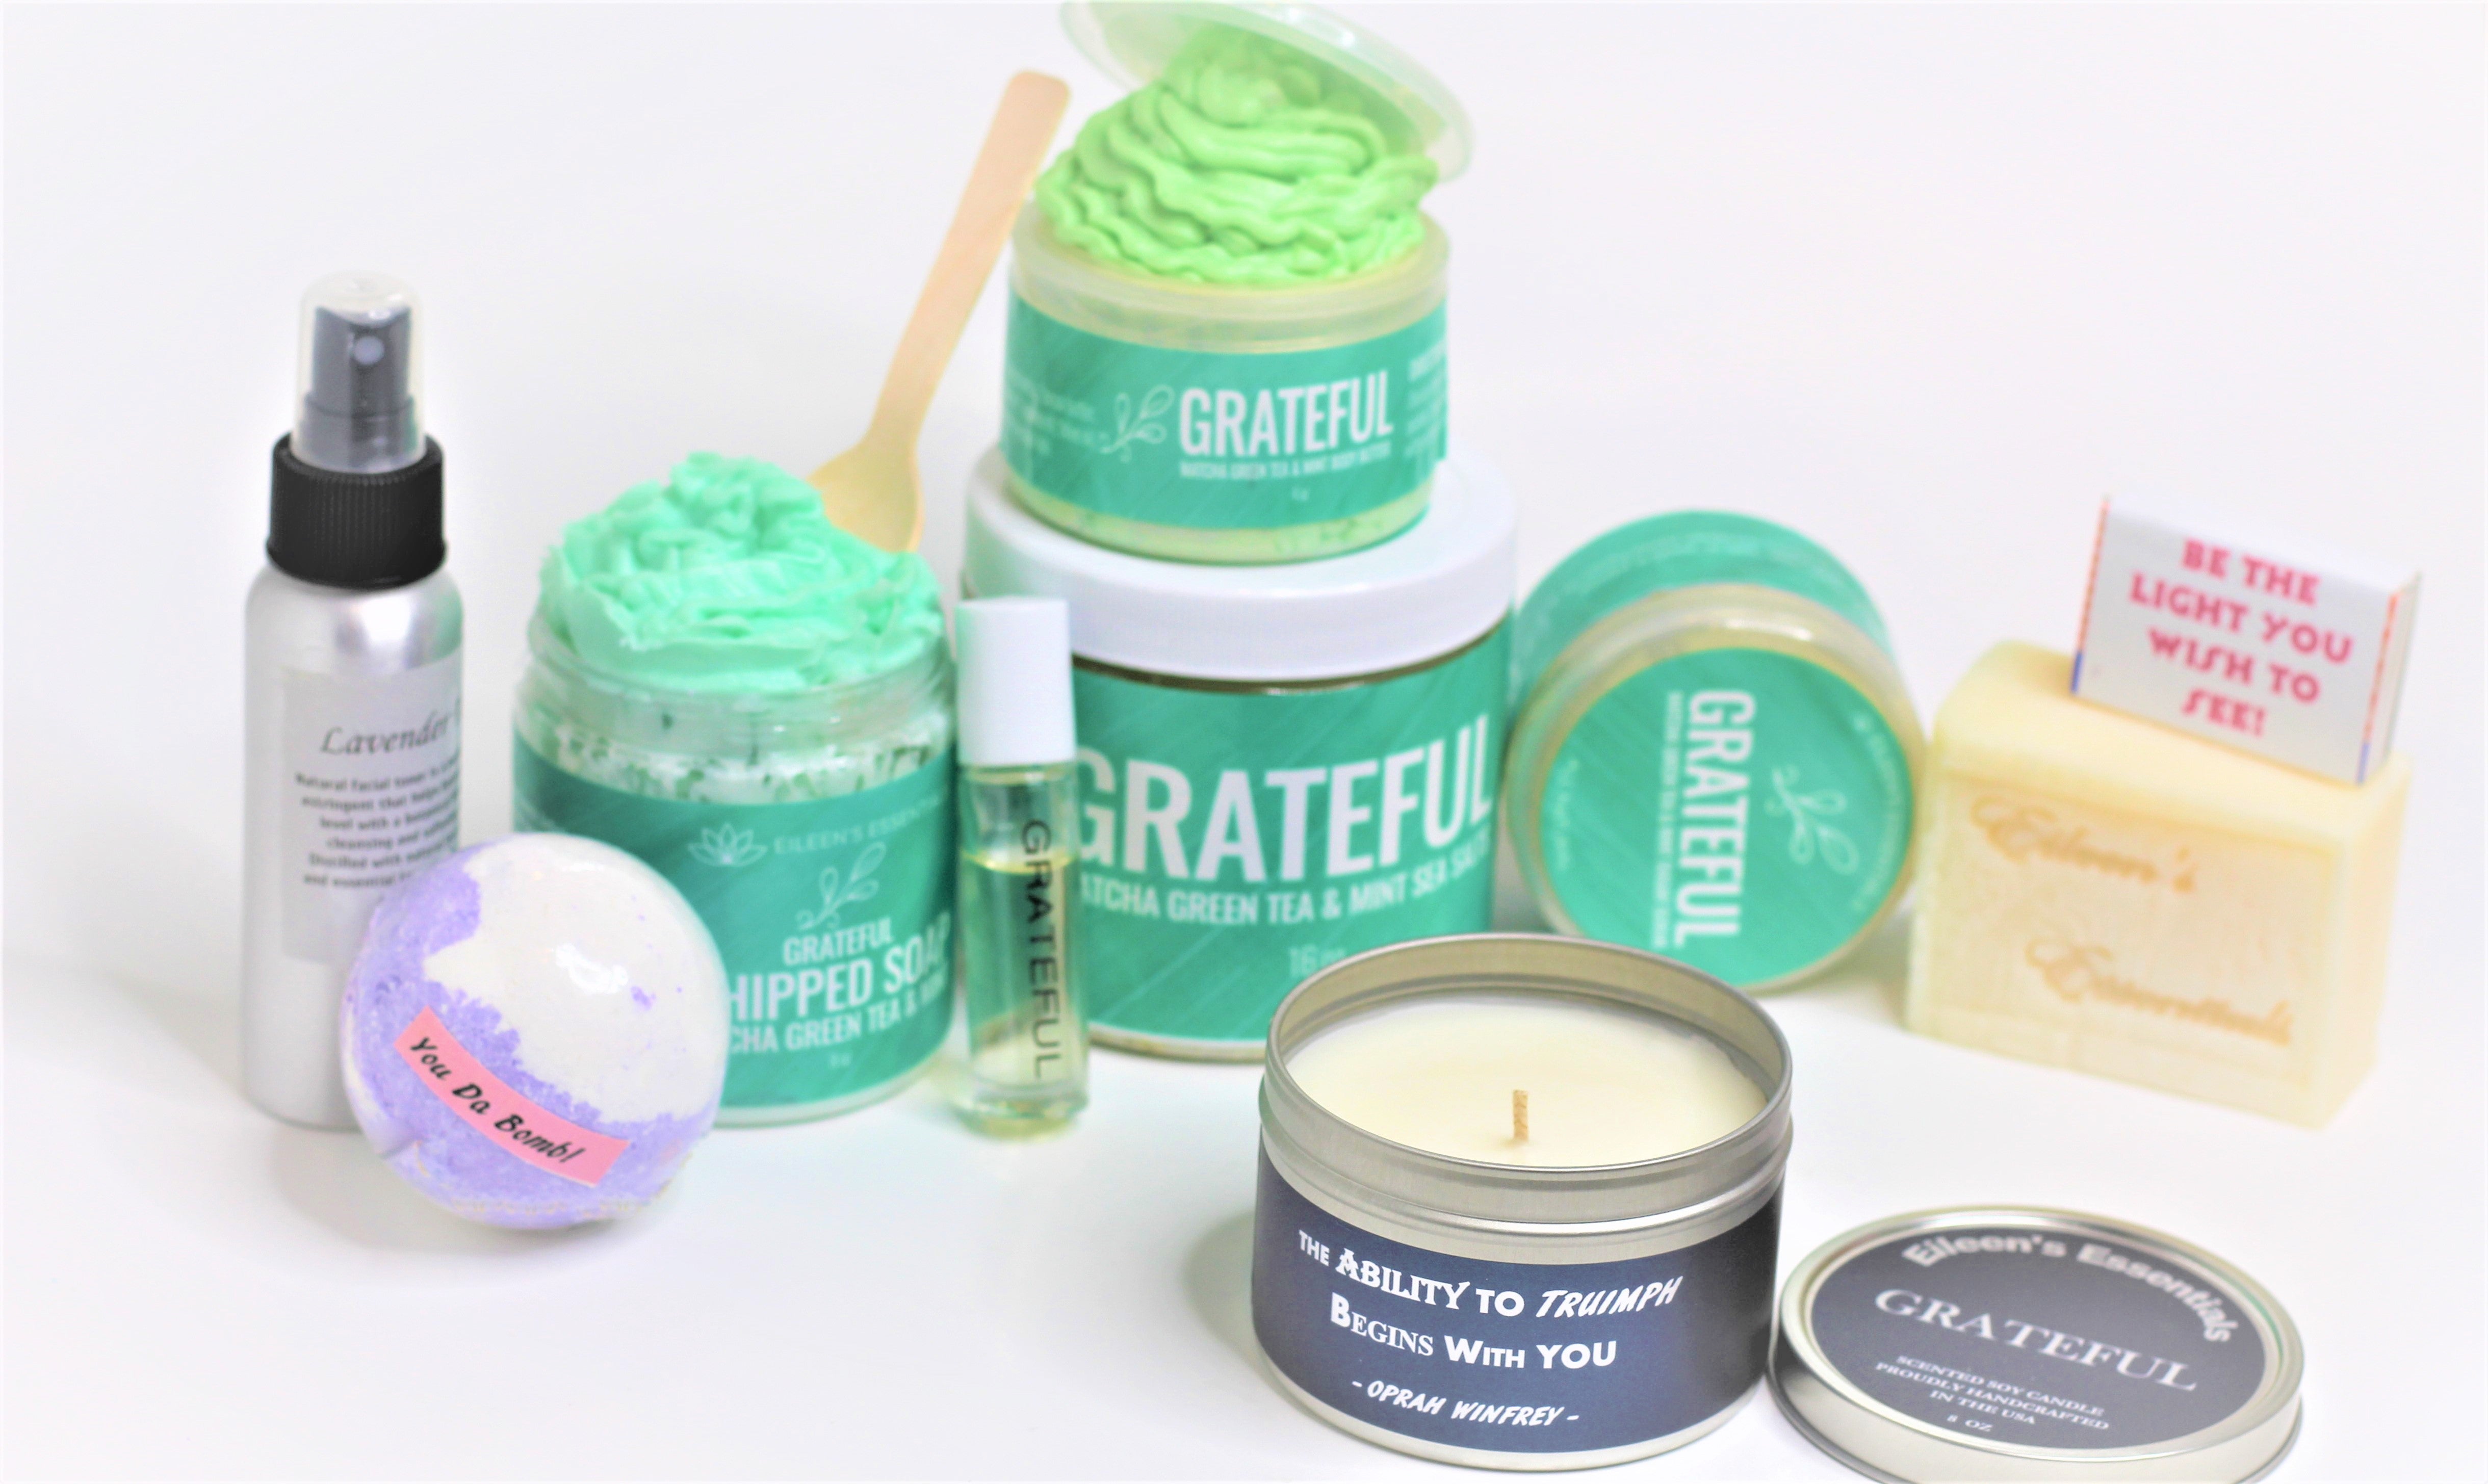 The Ultimate Spa Gift Set; "GRATEFUL" (Mint and Matcha Green Tea)